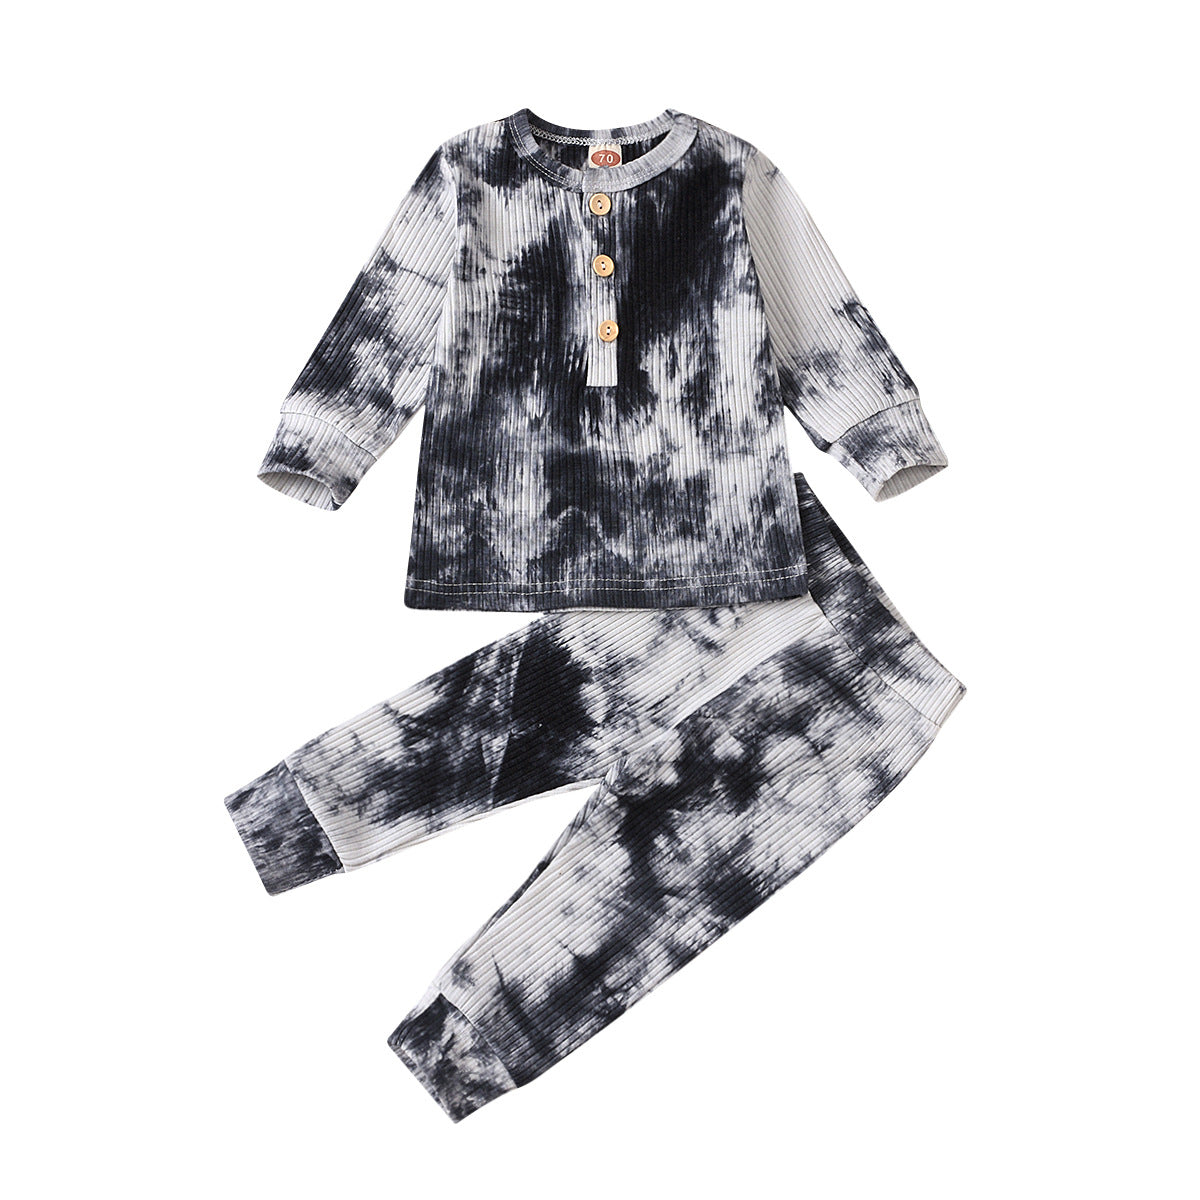 Autumn New Style Tie-dye Suit For Boys And Infants